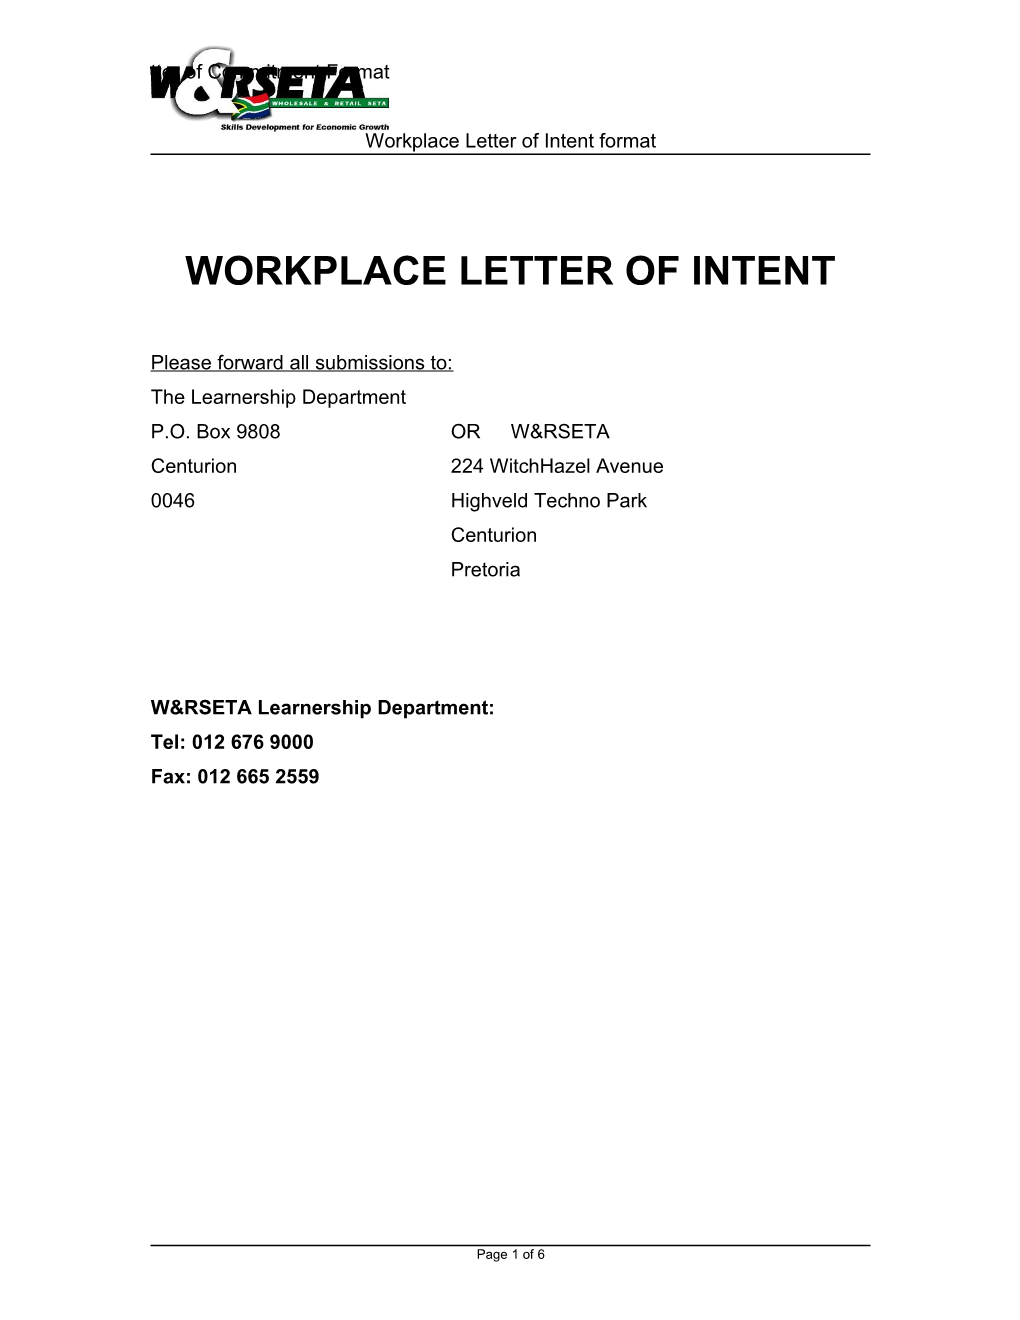 Workplace Letter of Intent Format